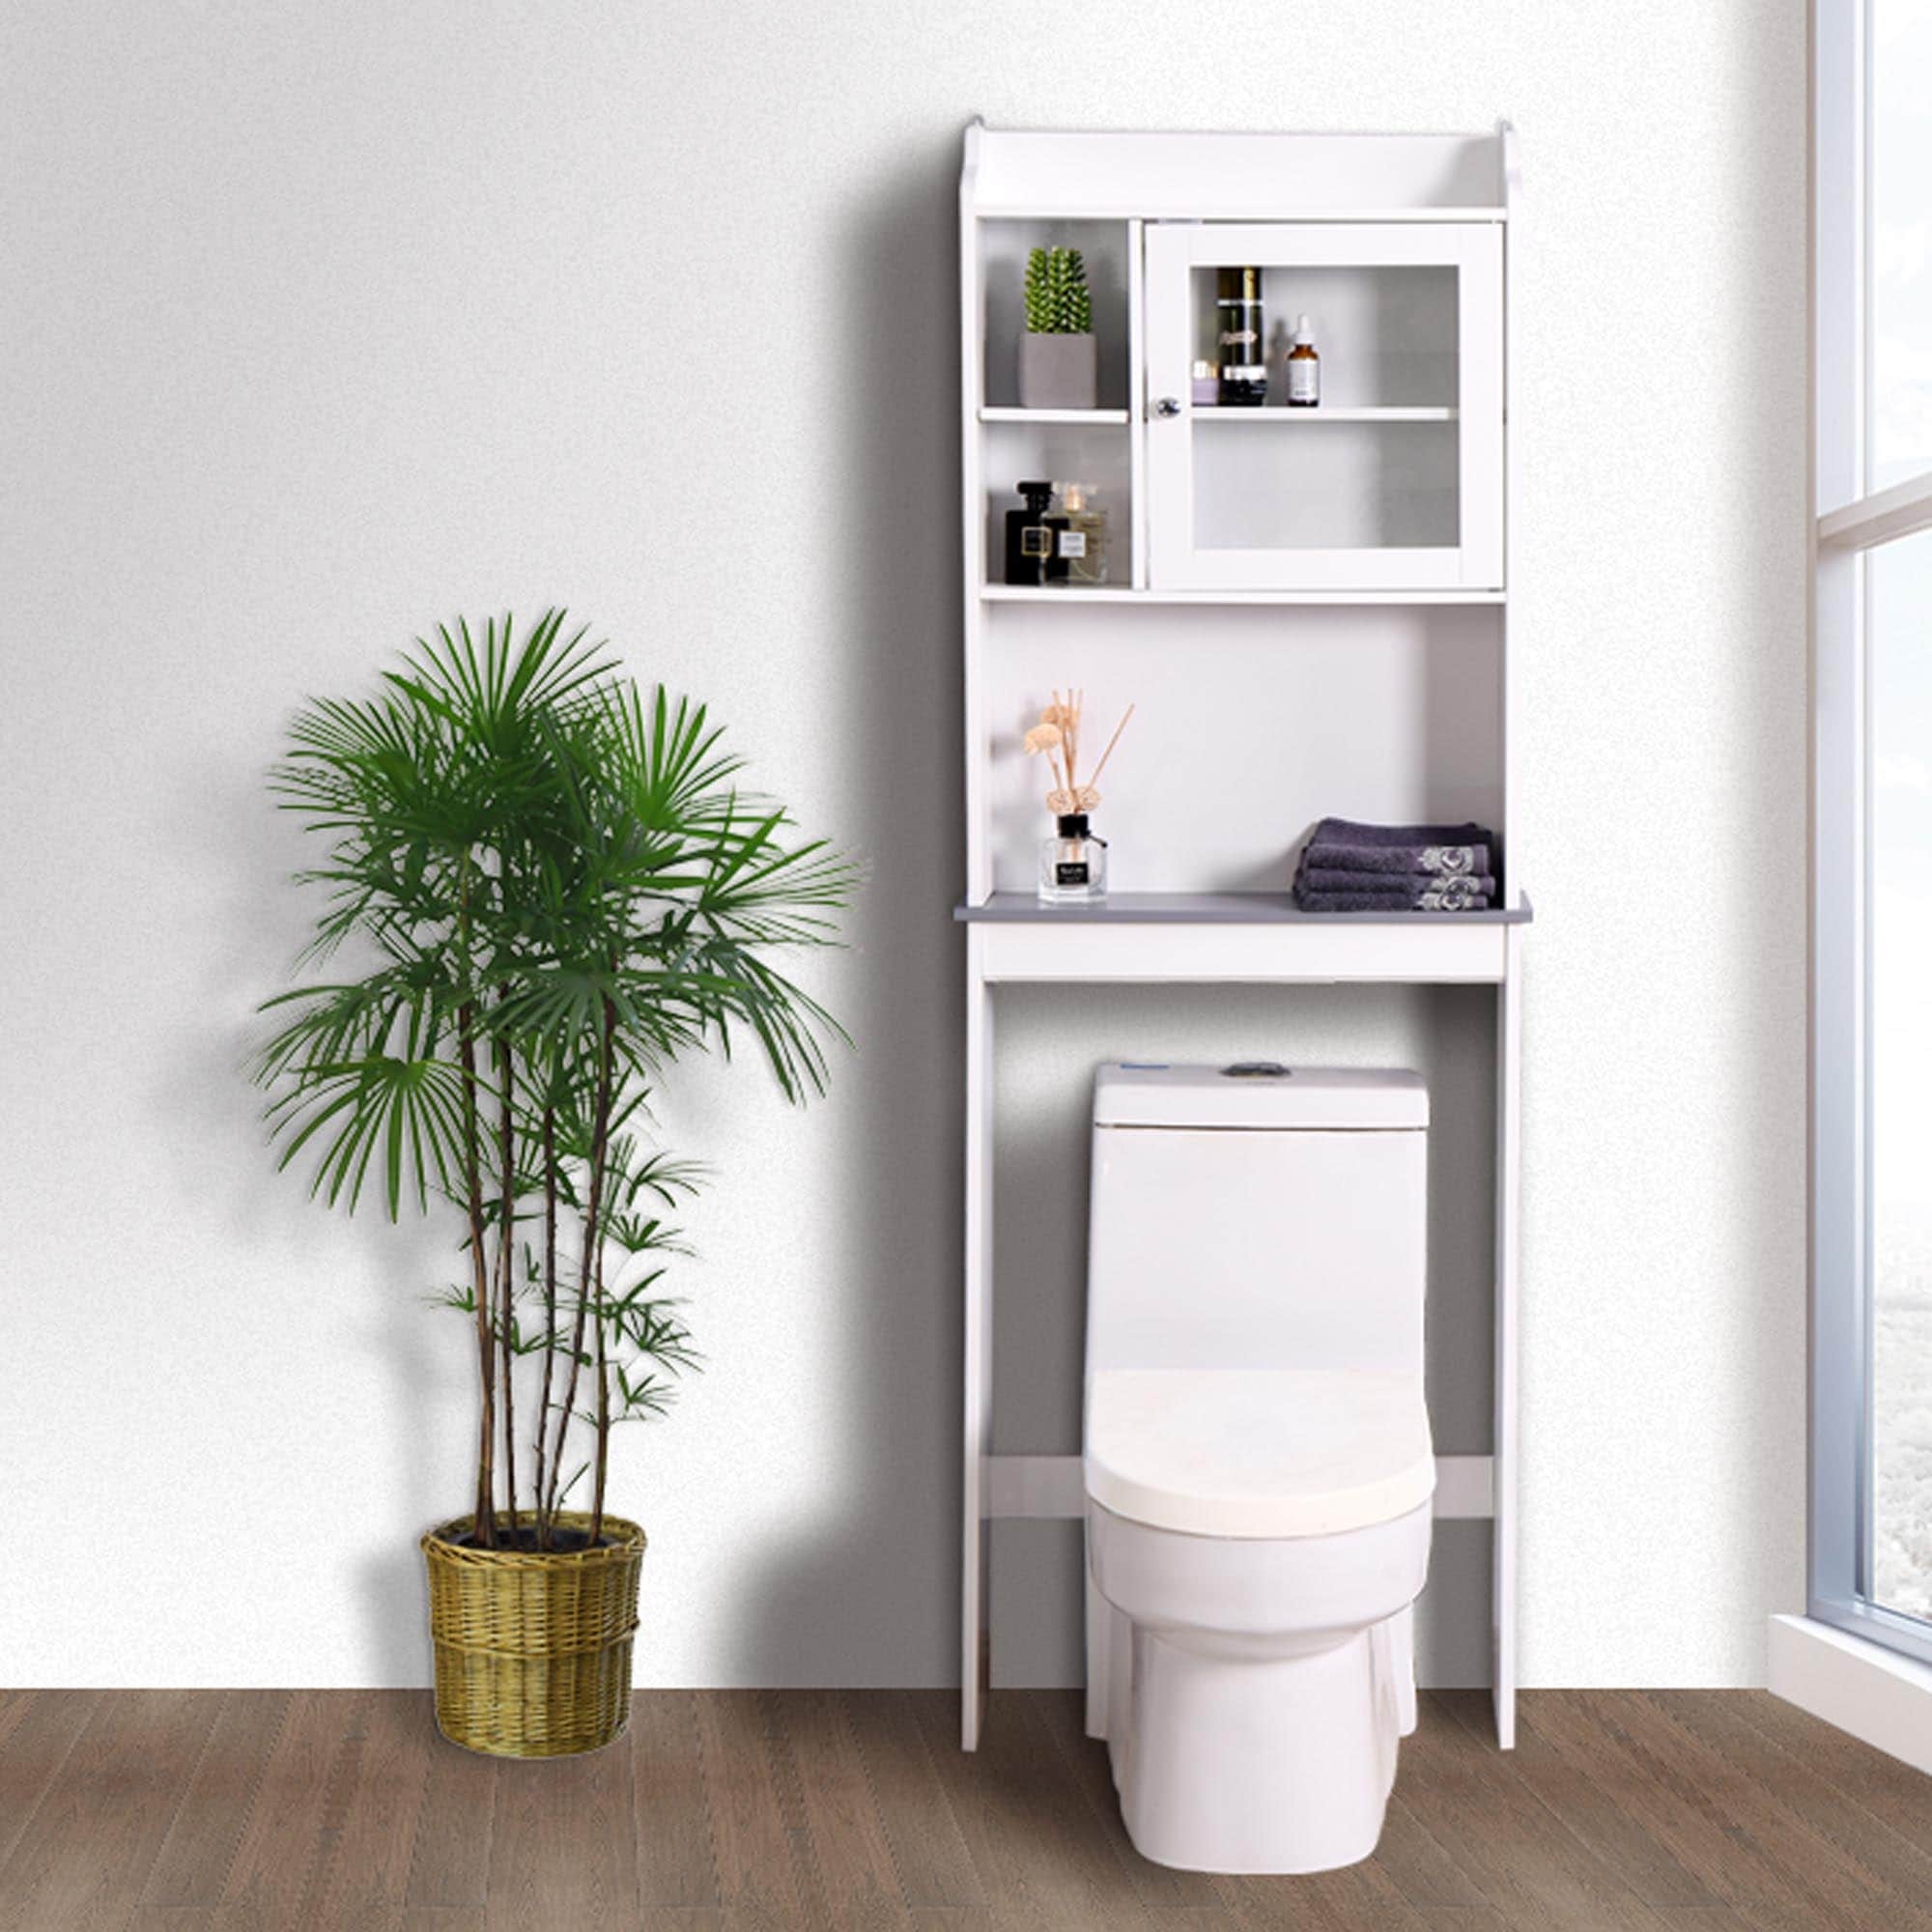 https://ak1.ostkcdn.com/images/products/is/images/direct/2a3da7ce8f02ca548c6a6cb717c4587a0c353361/Modern-Over-The-Toilet-Space-Saver-Organization-Wood-Storage-Cabinet.jpg